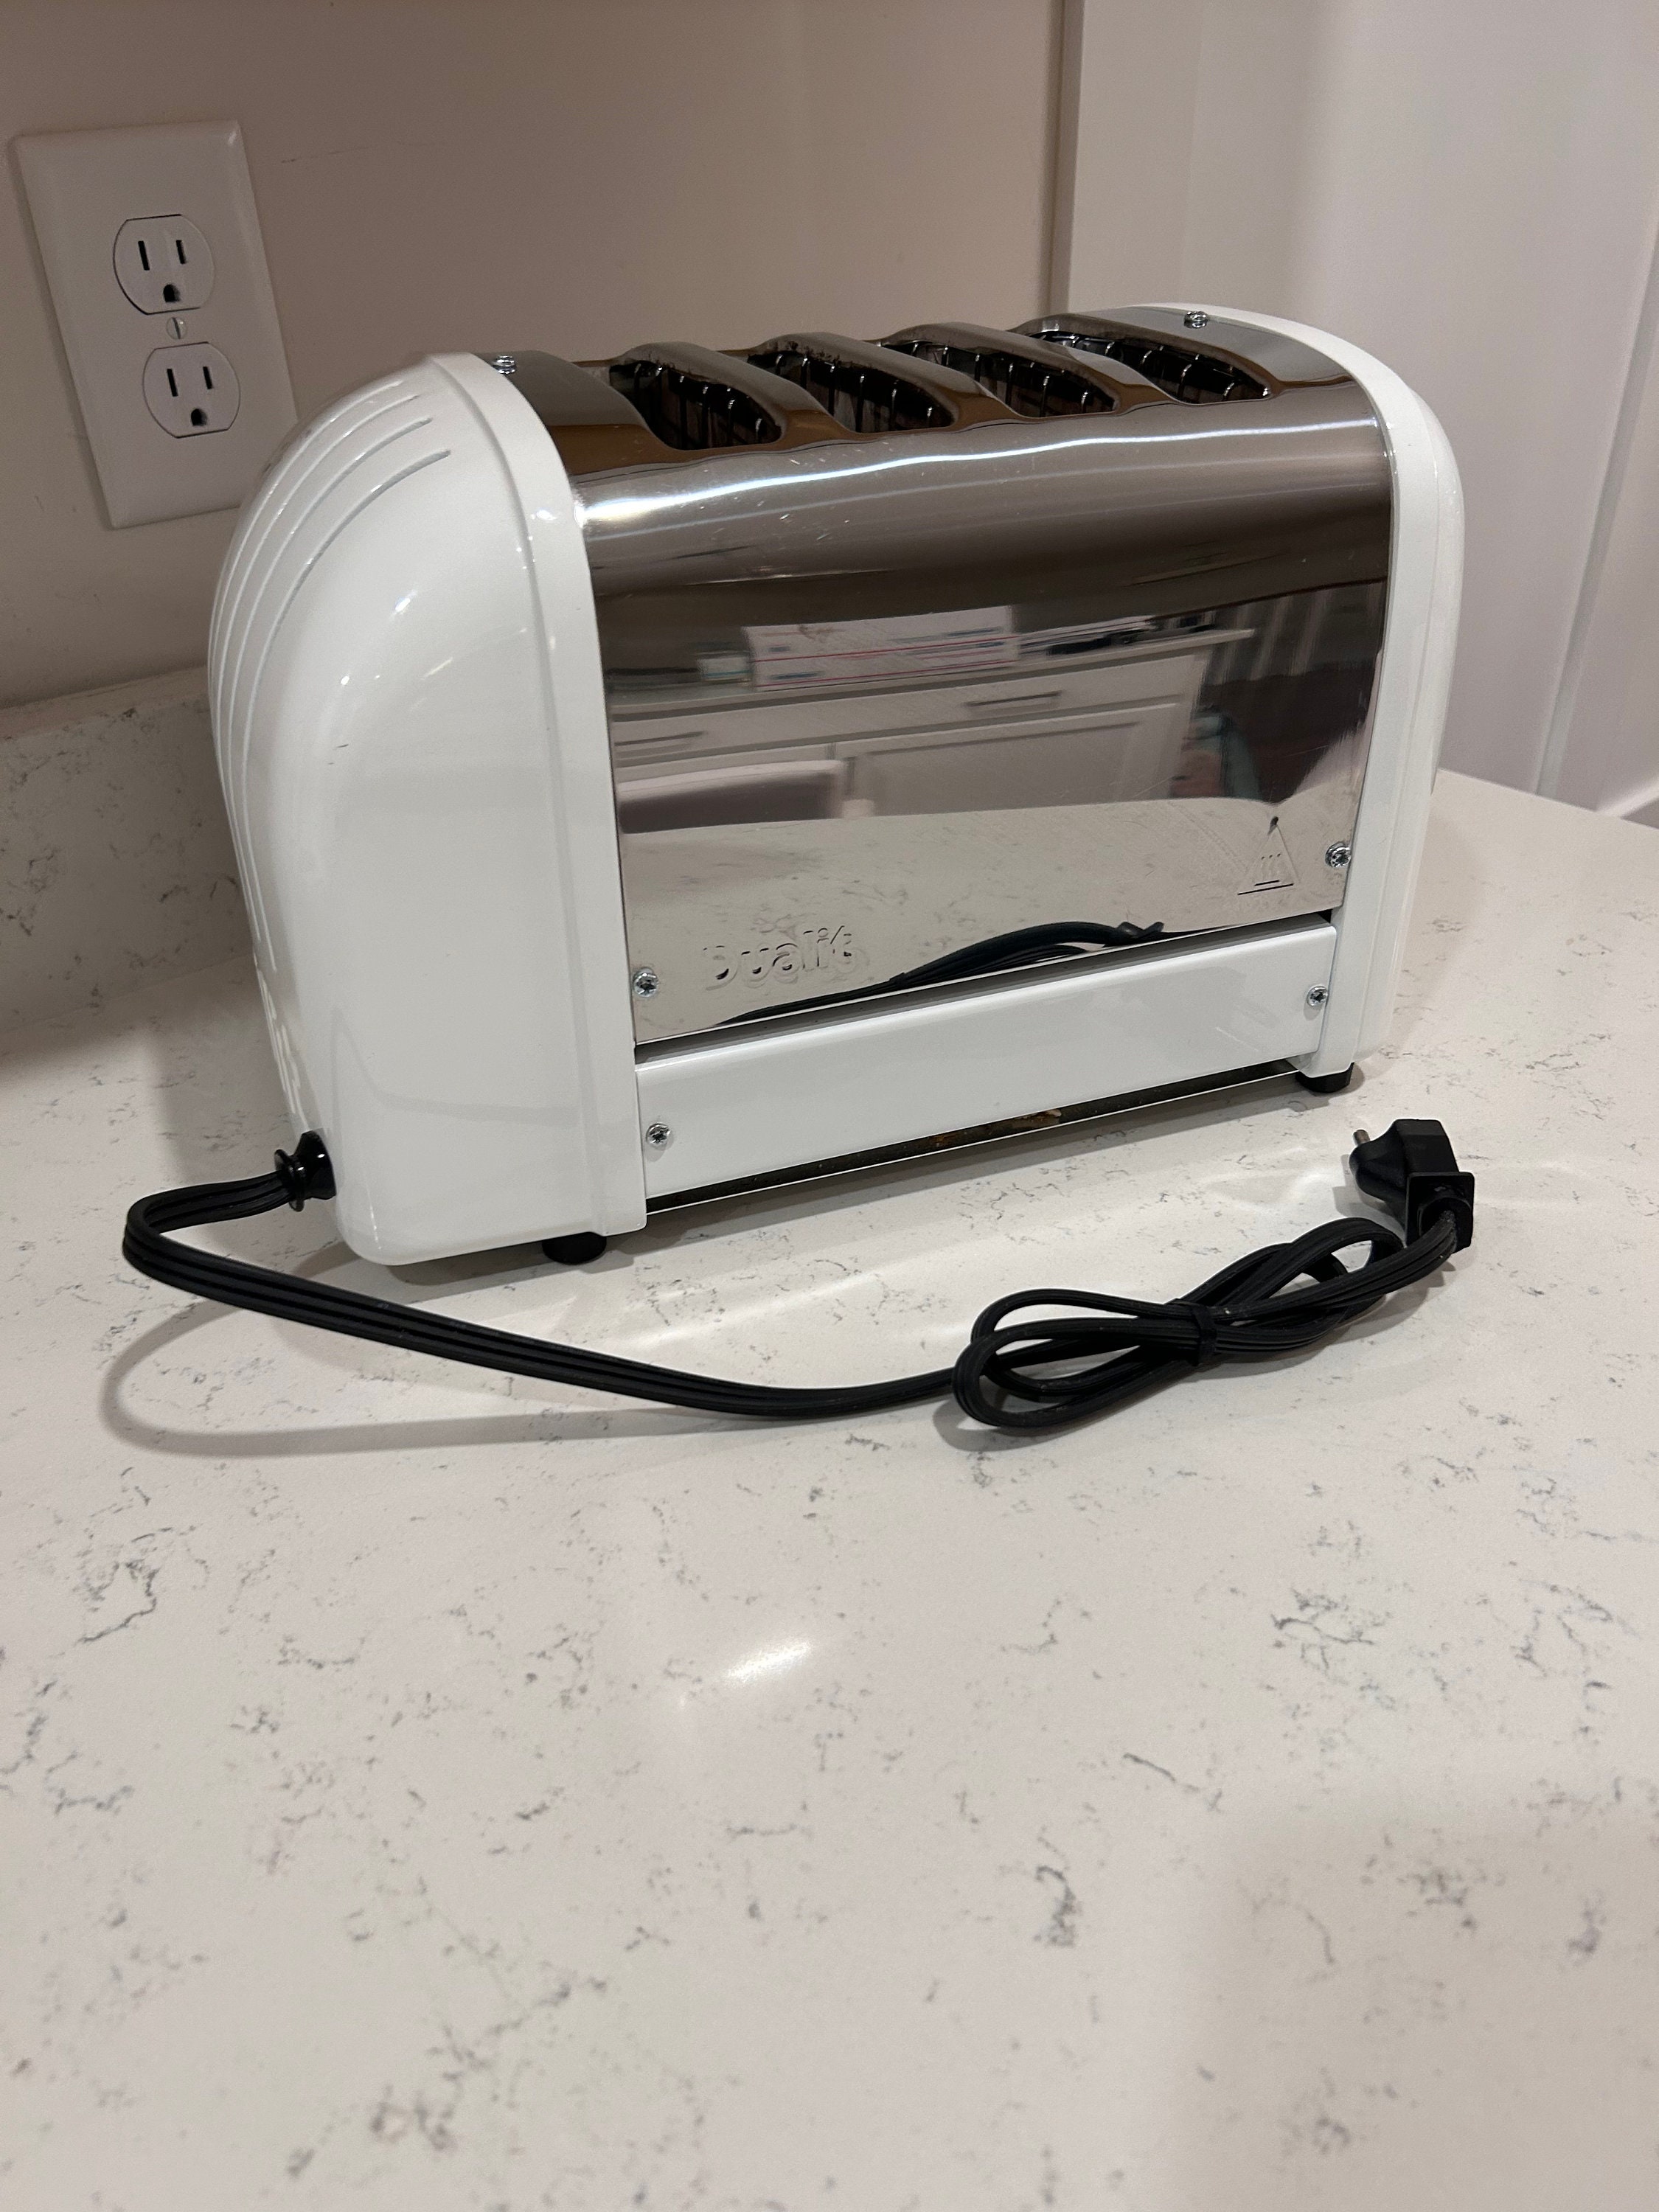 Dualit White 4 Slice Toaster Made in Britain BARELY USED 